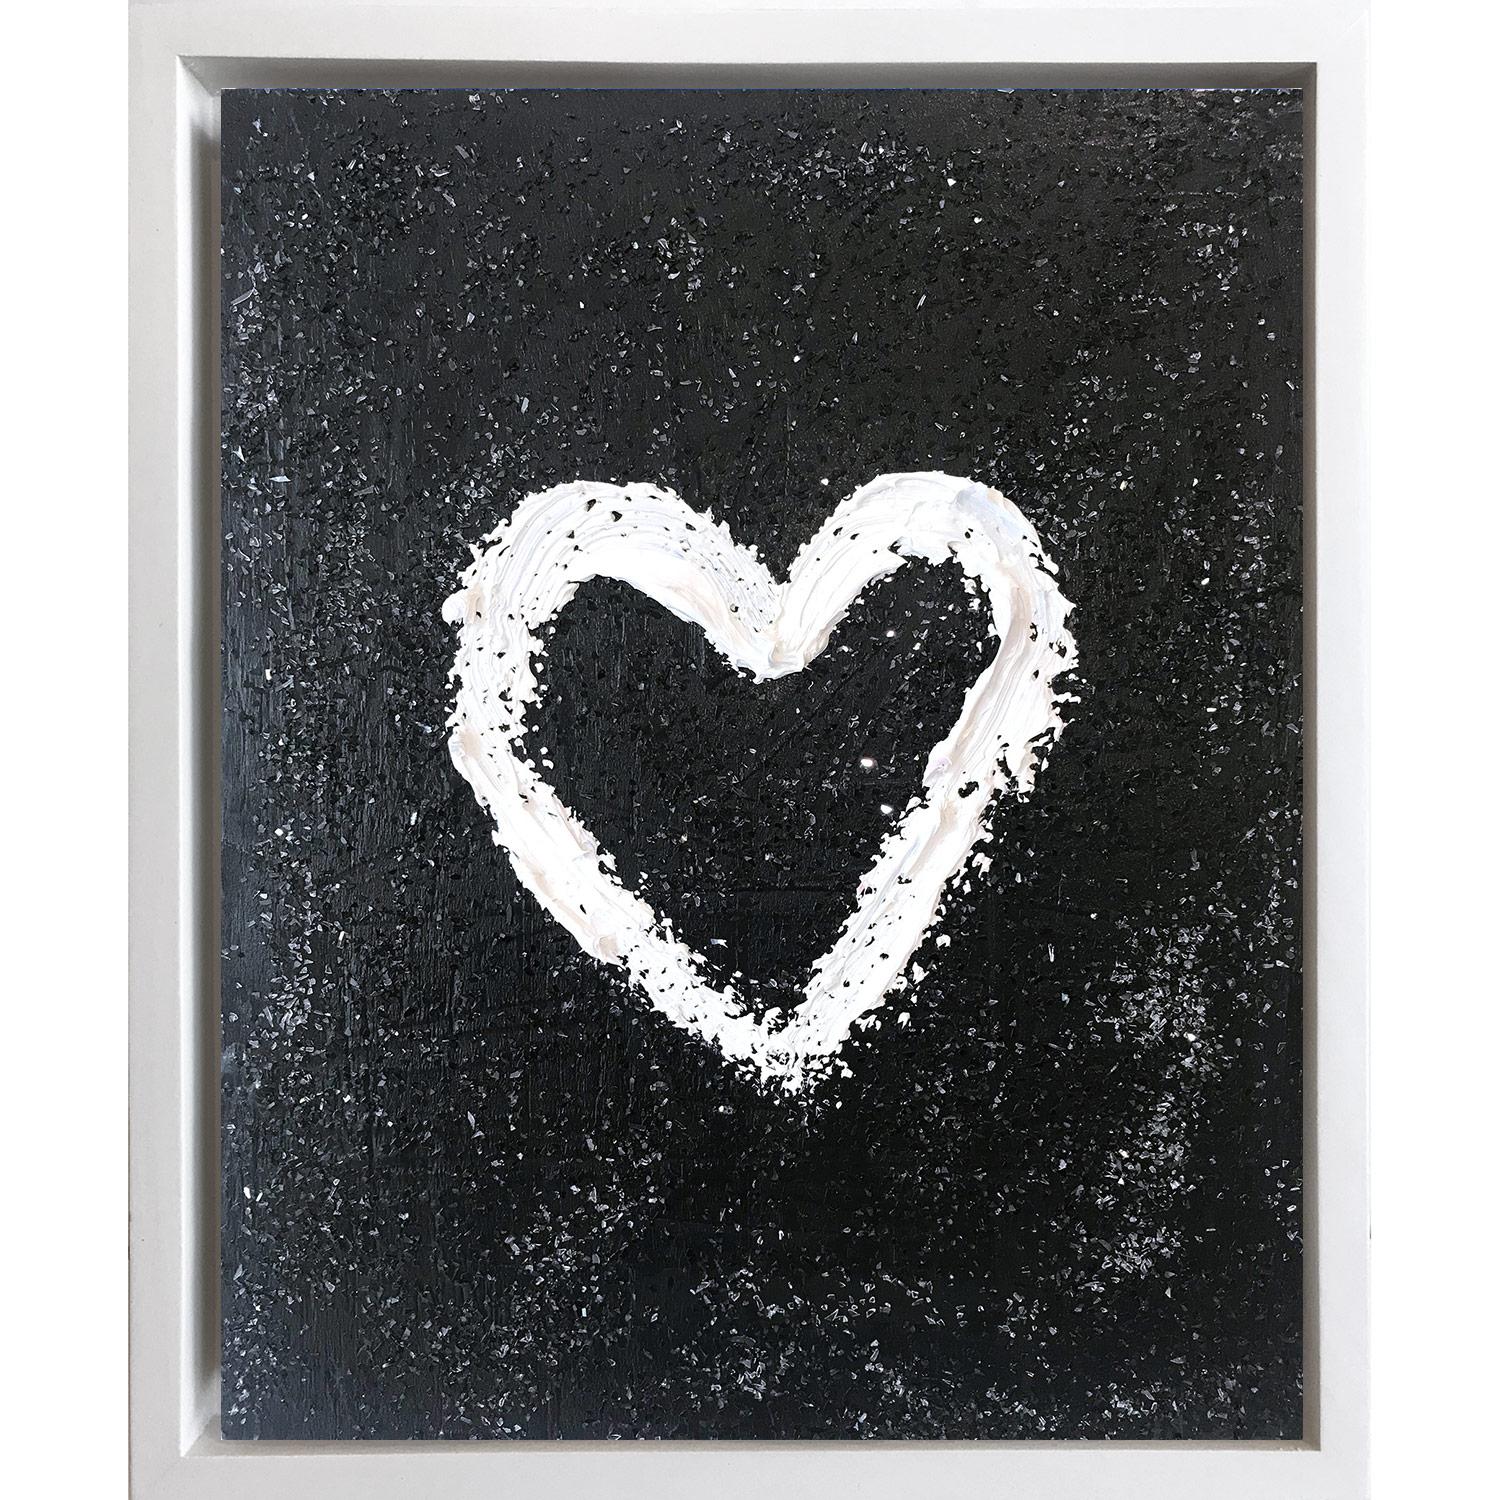 Cindy Shaoul Abstract Painting - "My Heart on Black Diamond" Contemporary Oil Painting Framed with Floater Frame